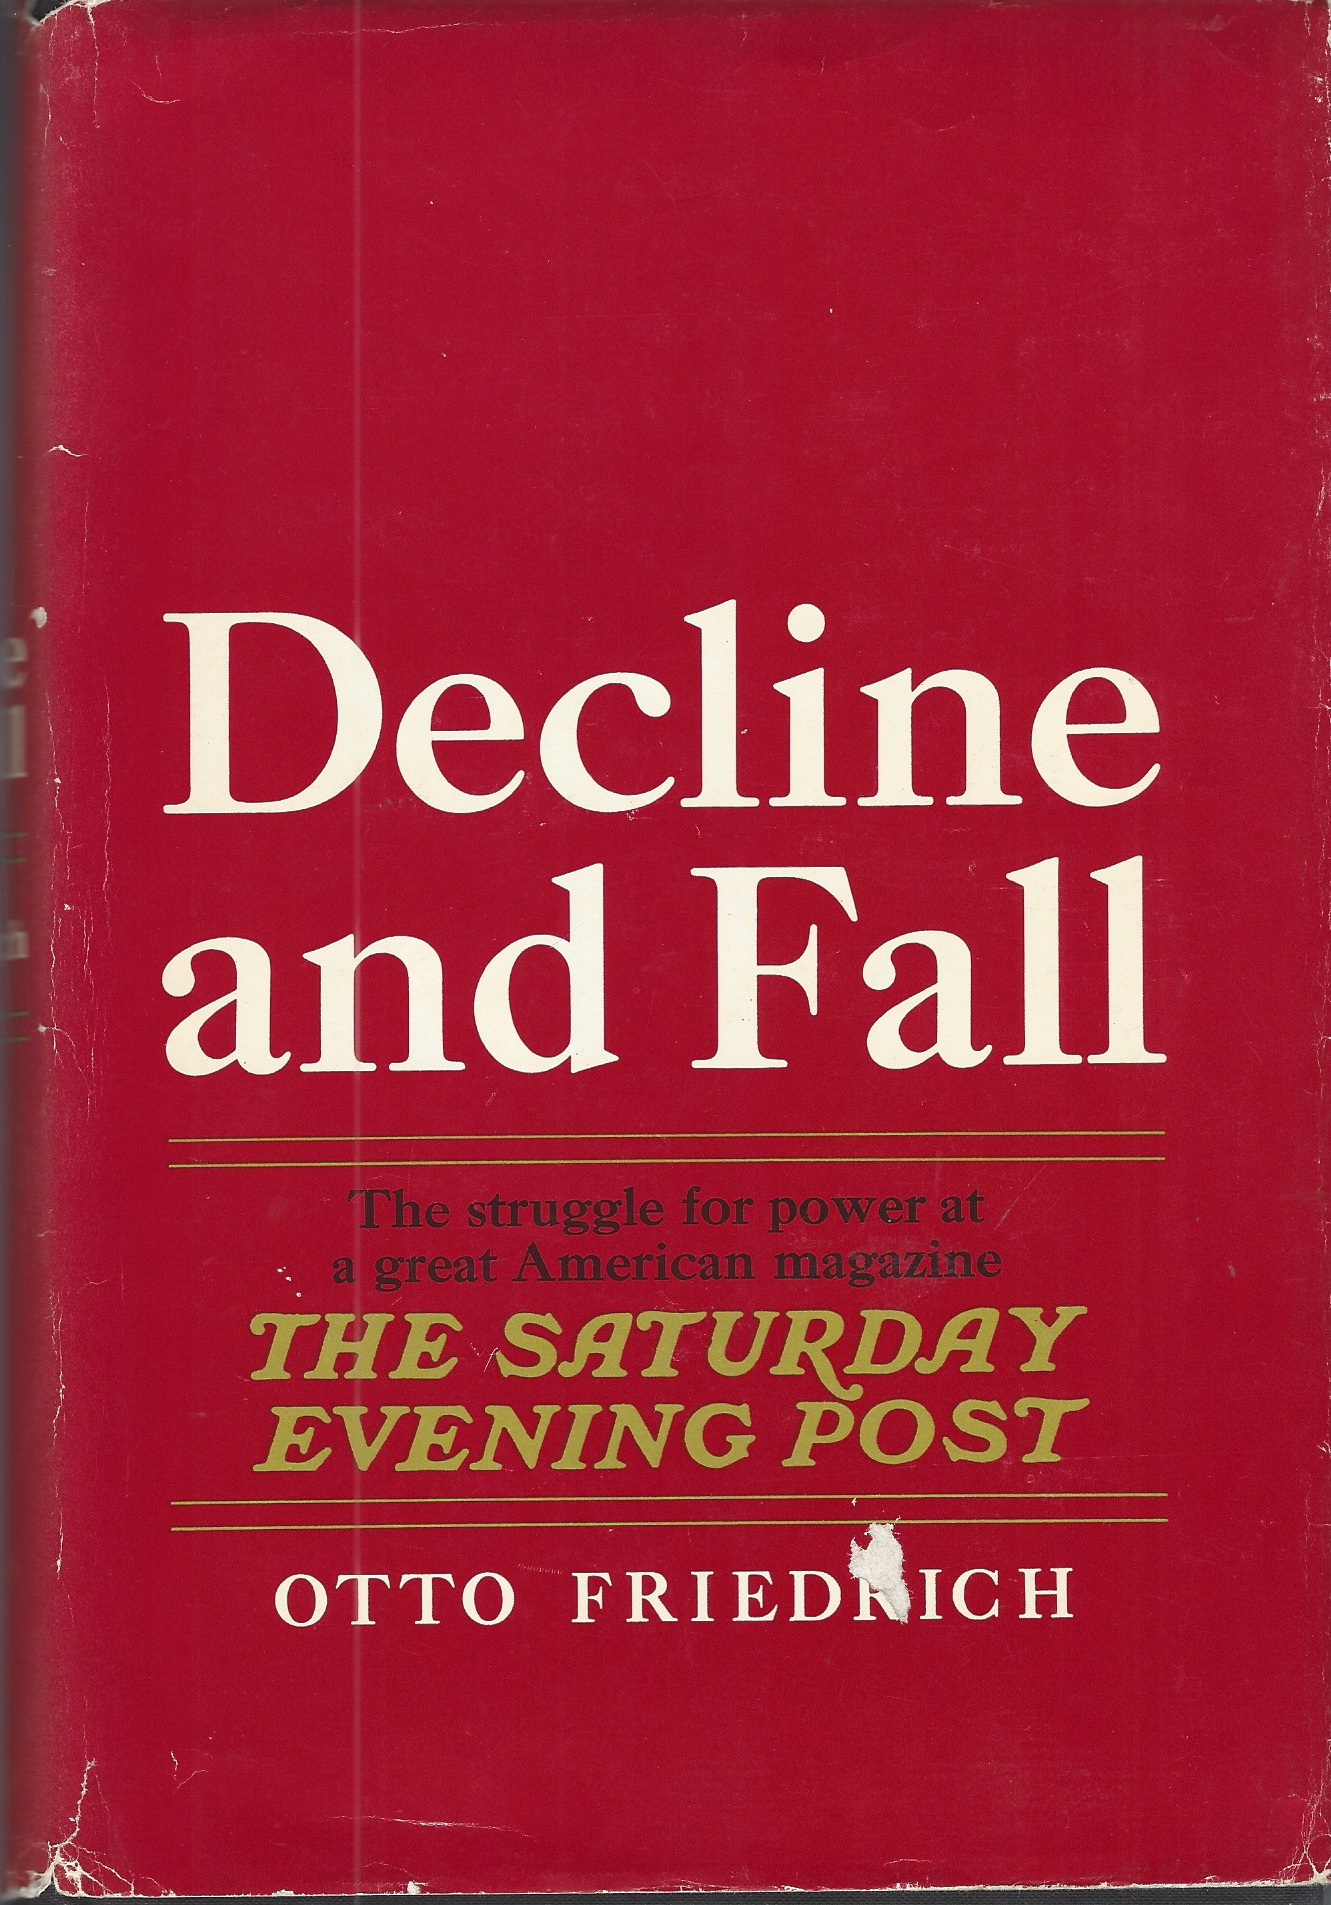 FRIEDRICH OTTO - Decline and Fall the Stuggle for Power at a Great American Magazine 'the Saturday Evening Post. '